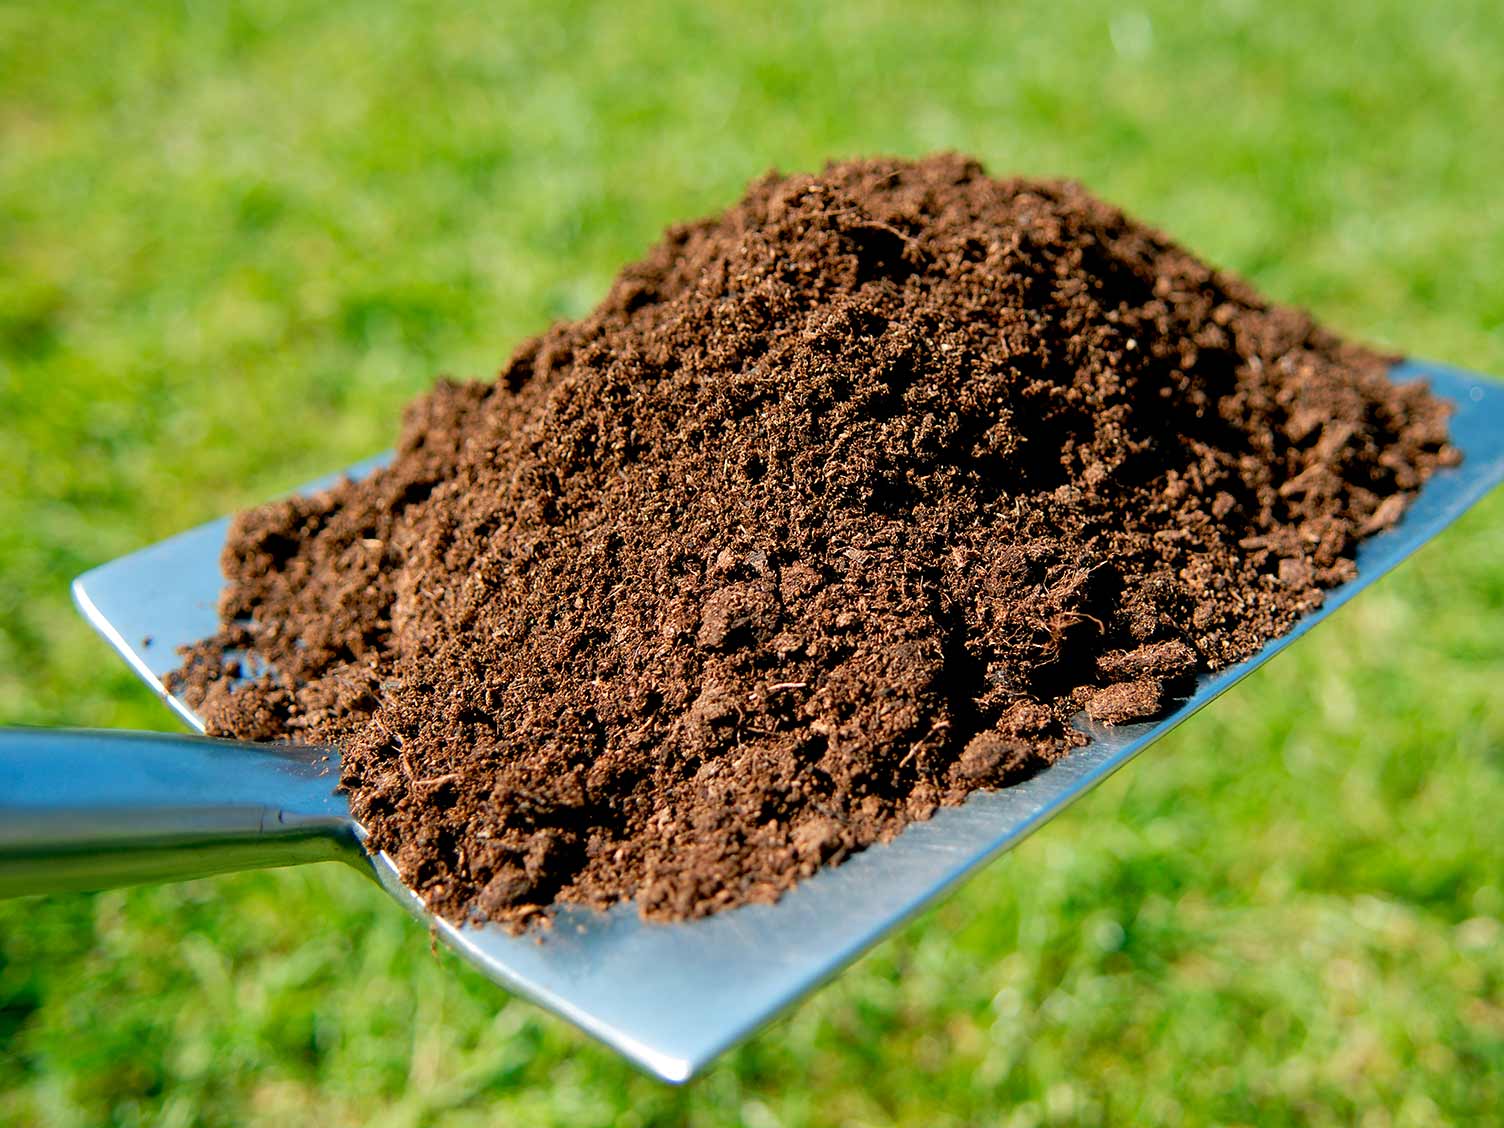 What Is The Proper Soil Mix For Grass